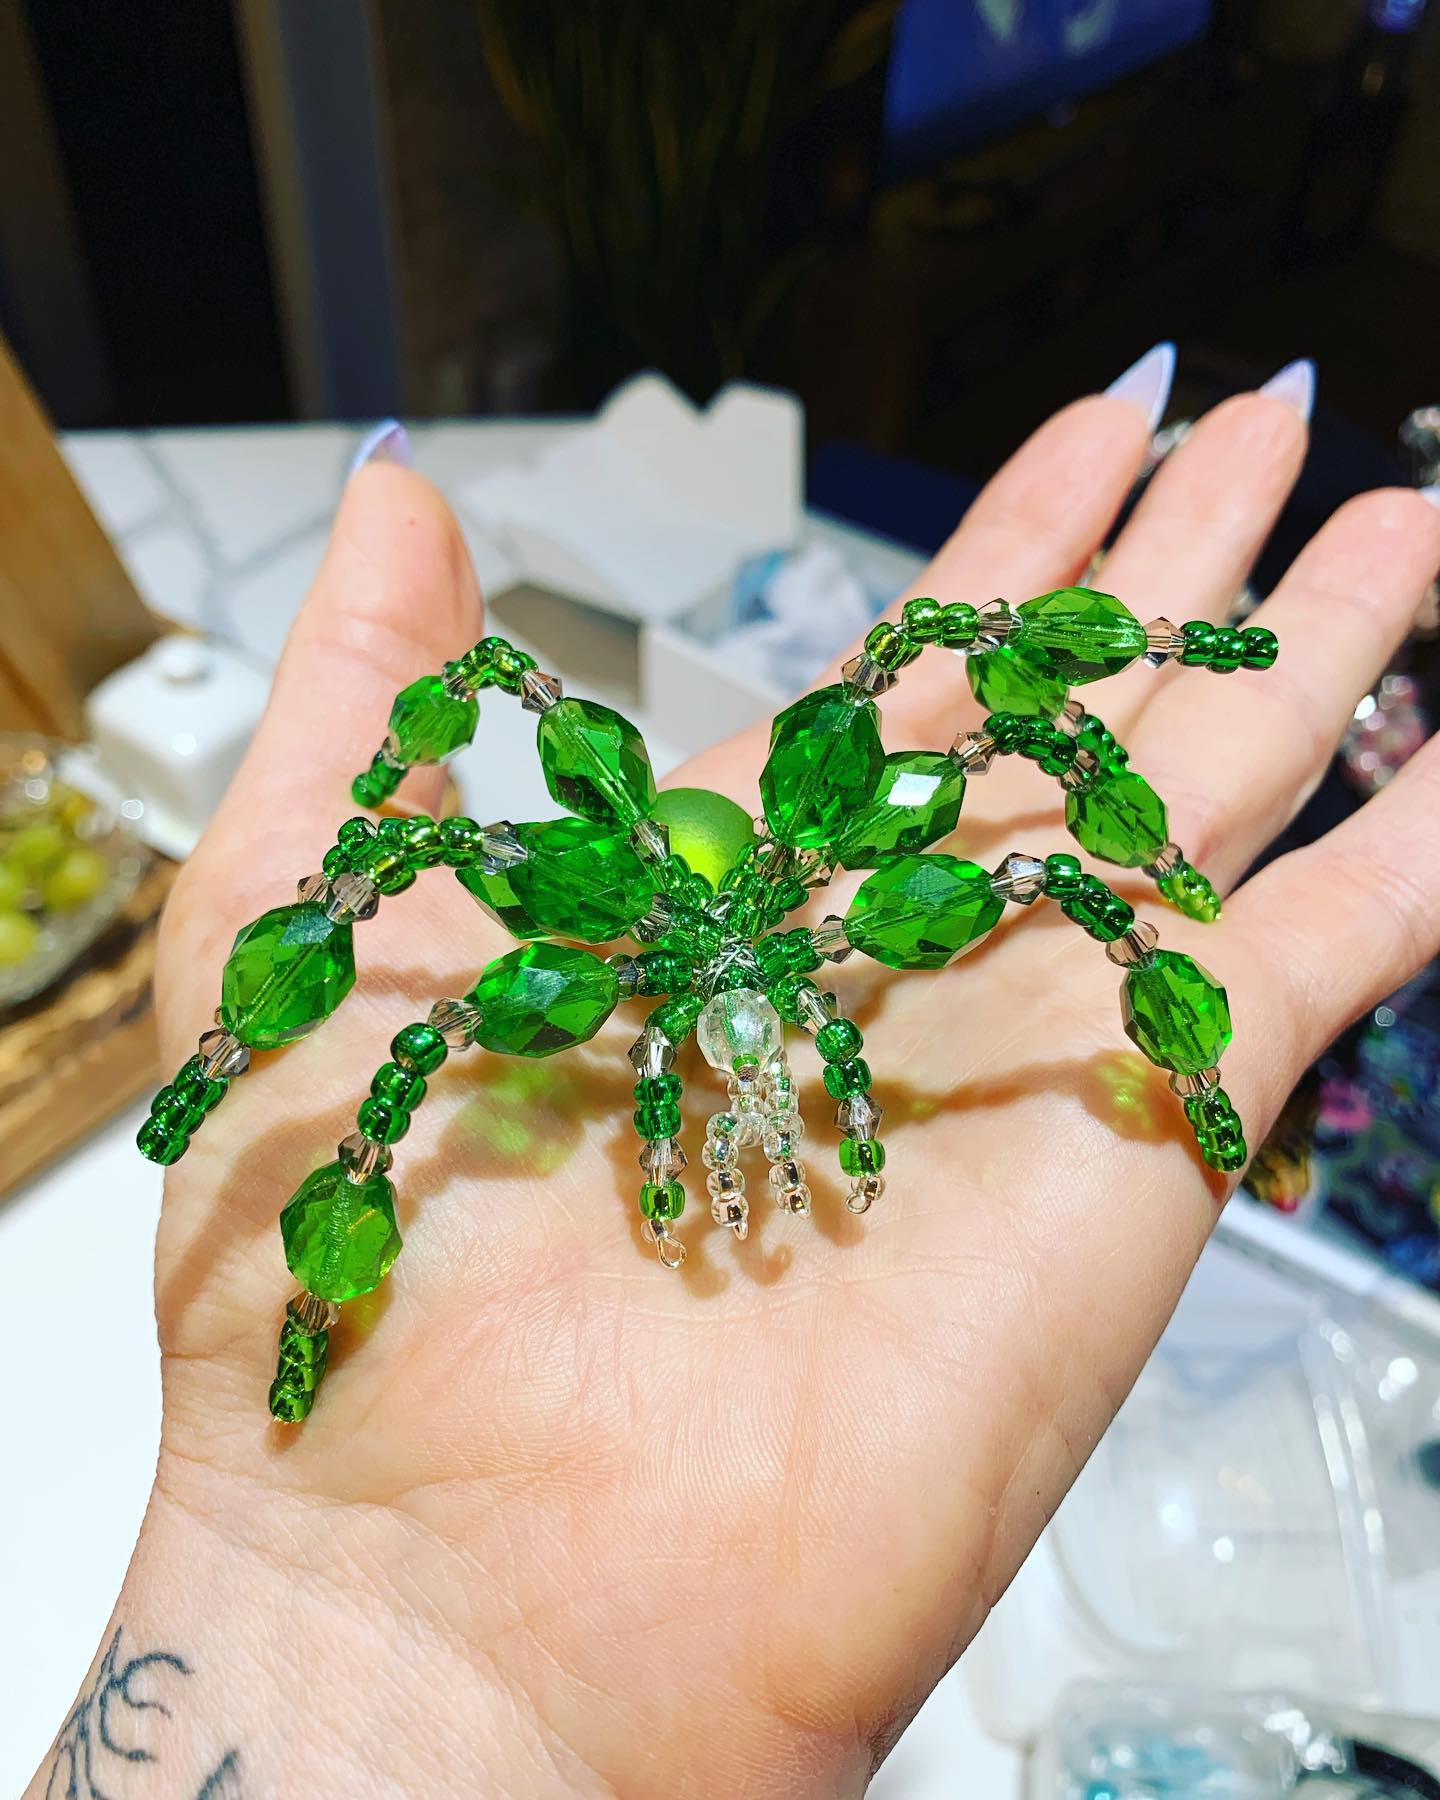 #greenswarovskicrystals #crystalspider #sample I do believe I have my “template” perfected just waiting on my supplies to arrive then onto making an assortment of colours and styles and a few more bugs I’m working on! #jewellerymaking #beading and fun! #greenbeads #greencrystal #craftingideas #broach #holidayspider #christmasspider #spider #wolfspider more fun brought to you by your fave #greeneyed  #dirtyblonde #glamazon #transsexualwoman #lovinglife💞 and #livingitlarge #amazonstyle 💕🖤💕